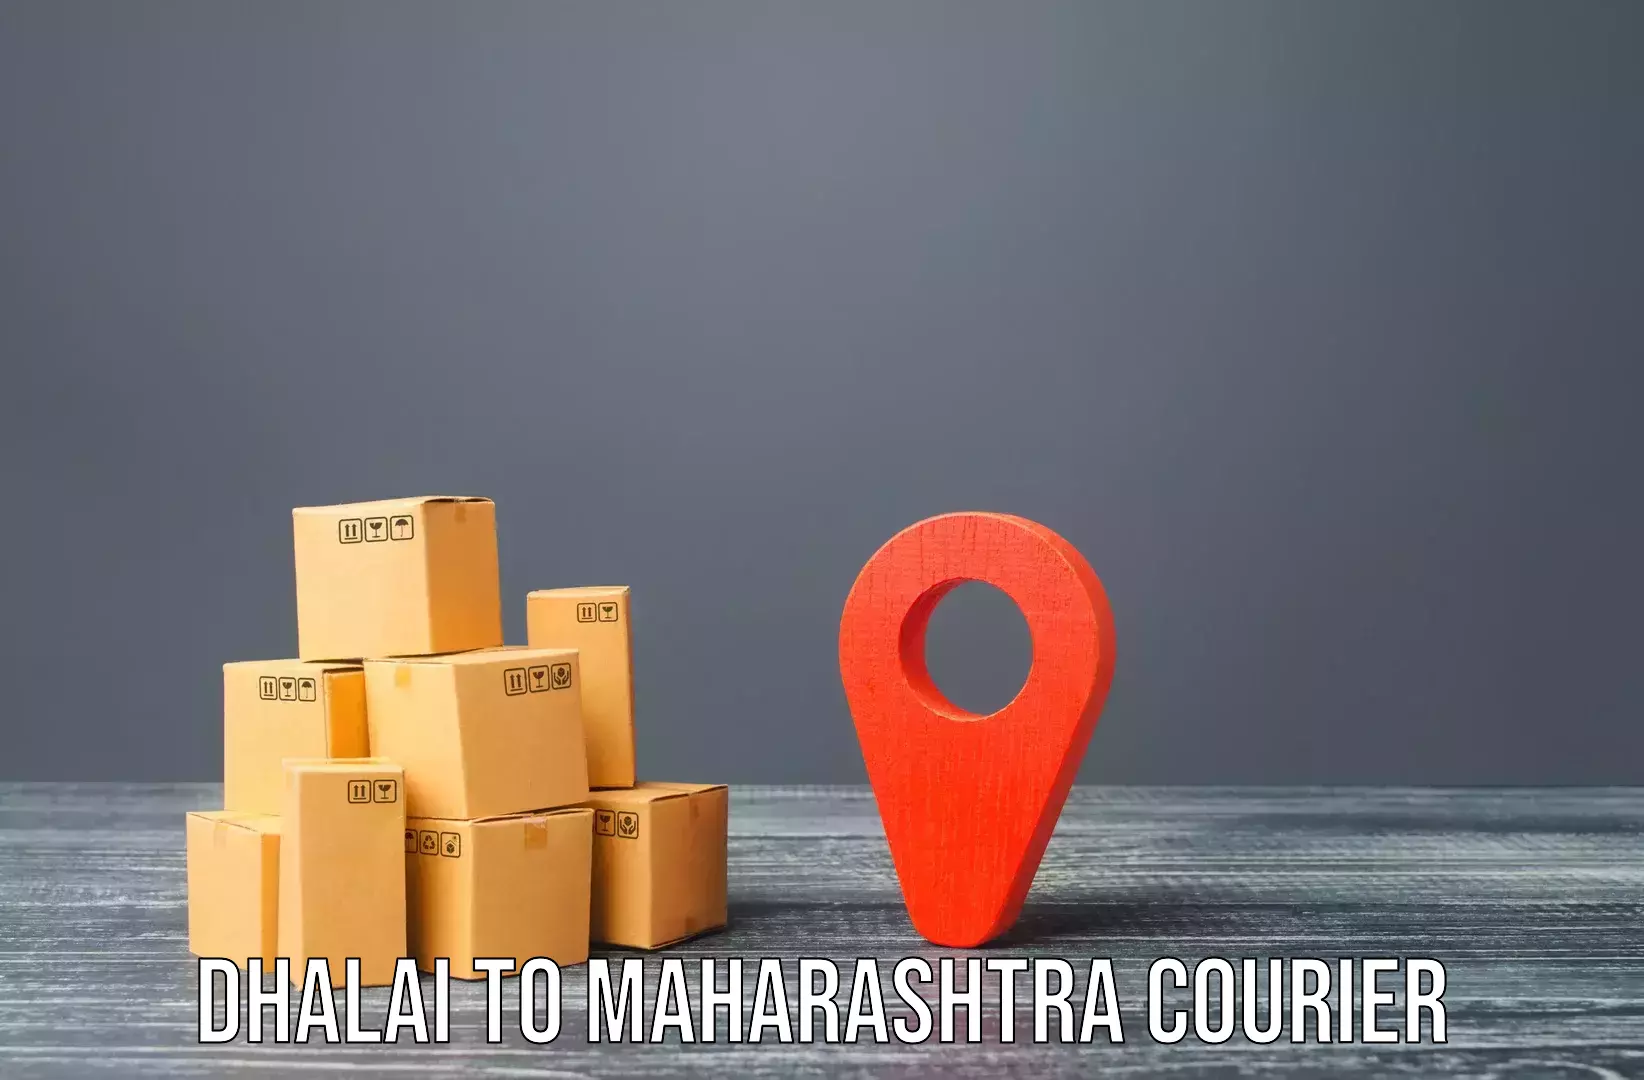 Efficient moving company Dhalai to Alephata